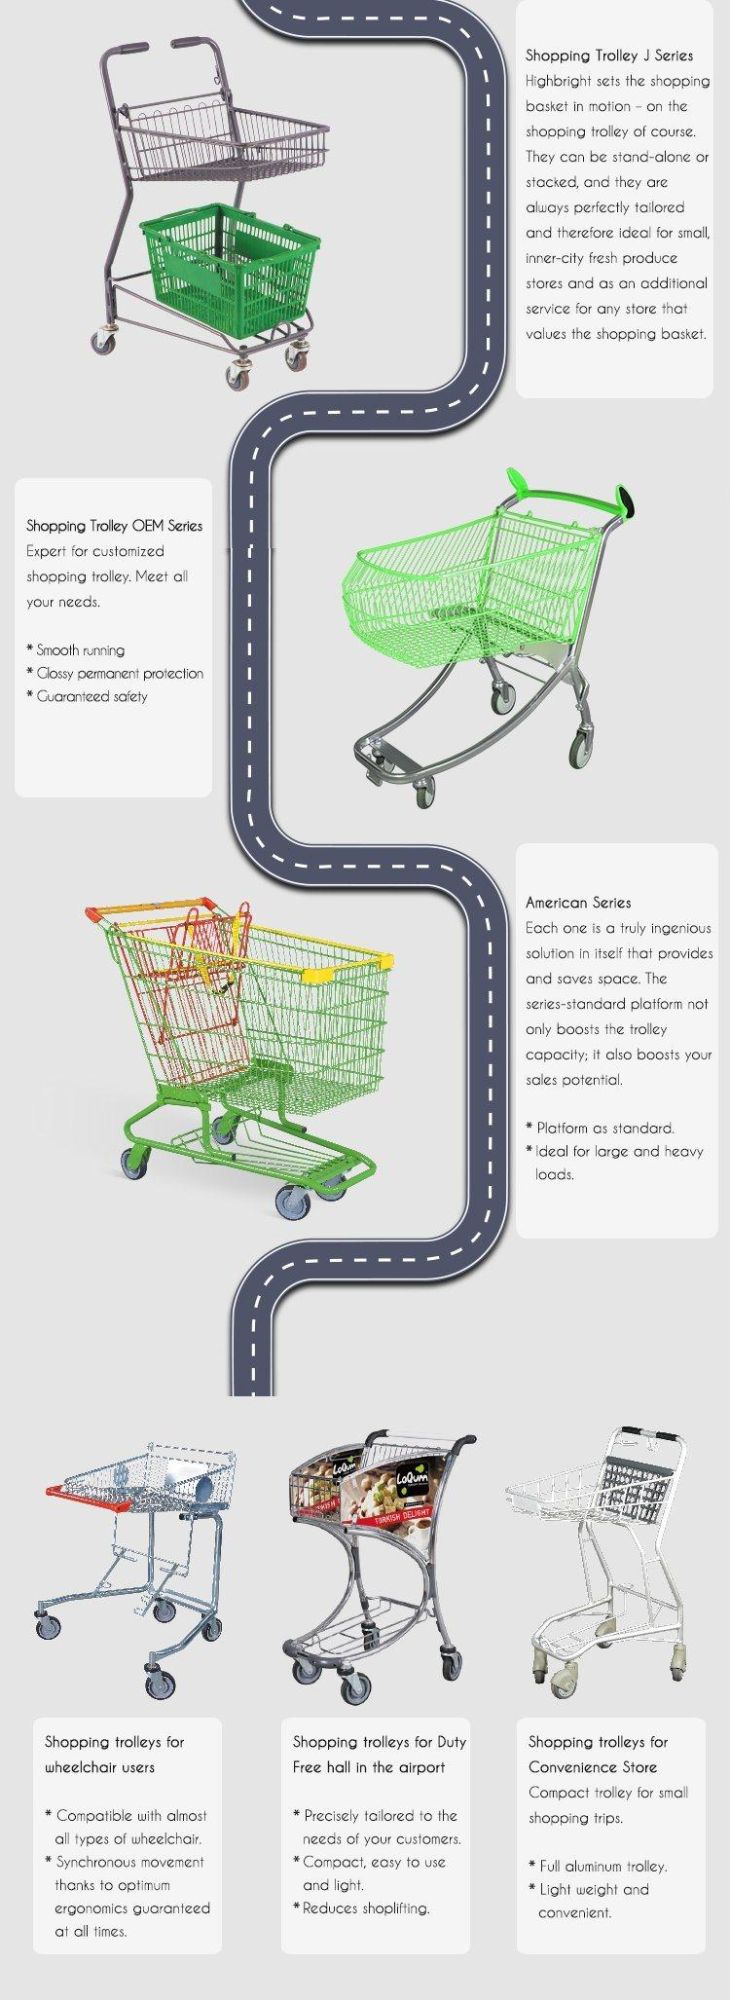 Metal High Quality Supermarket Shopping Trolley